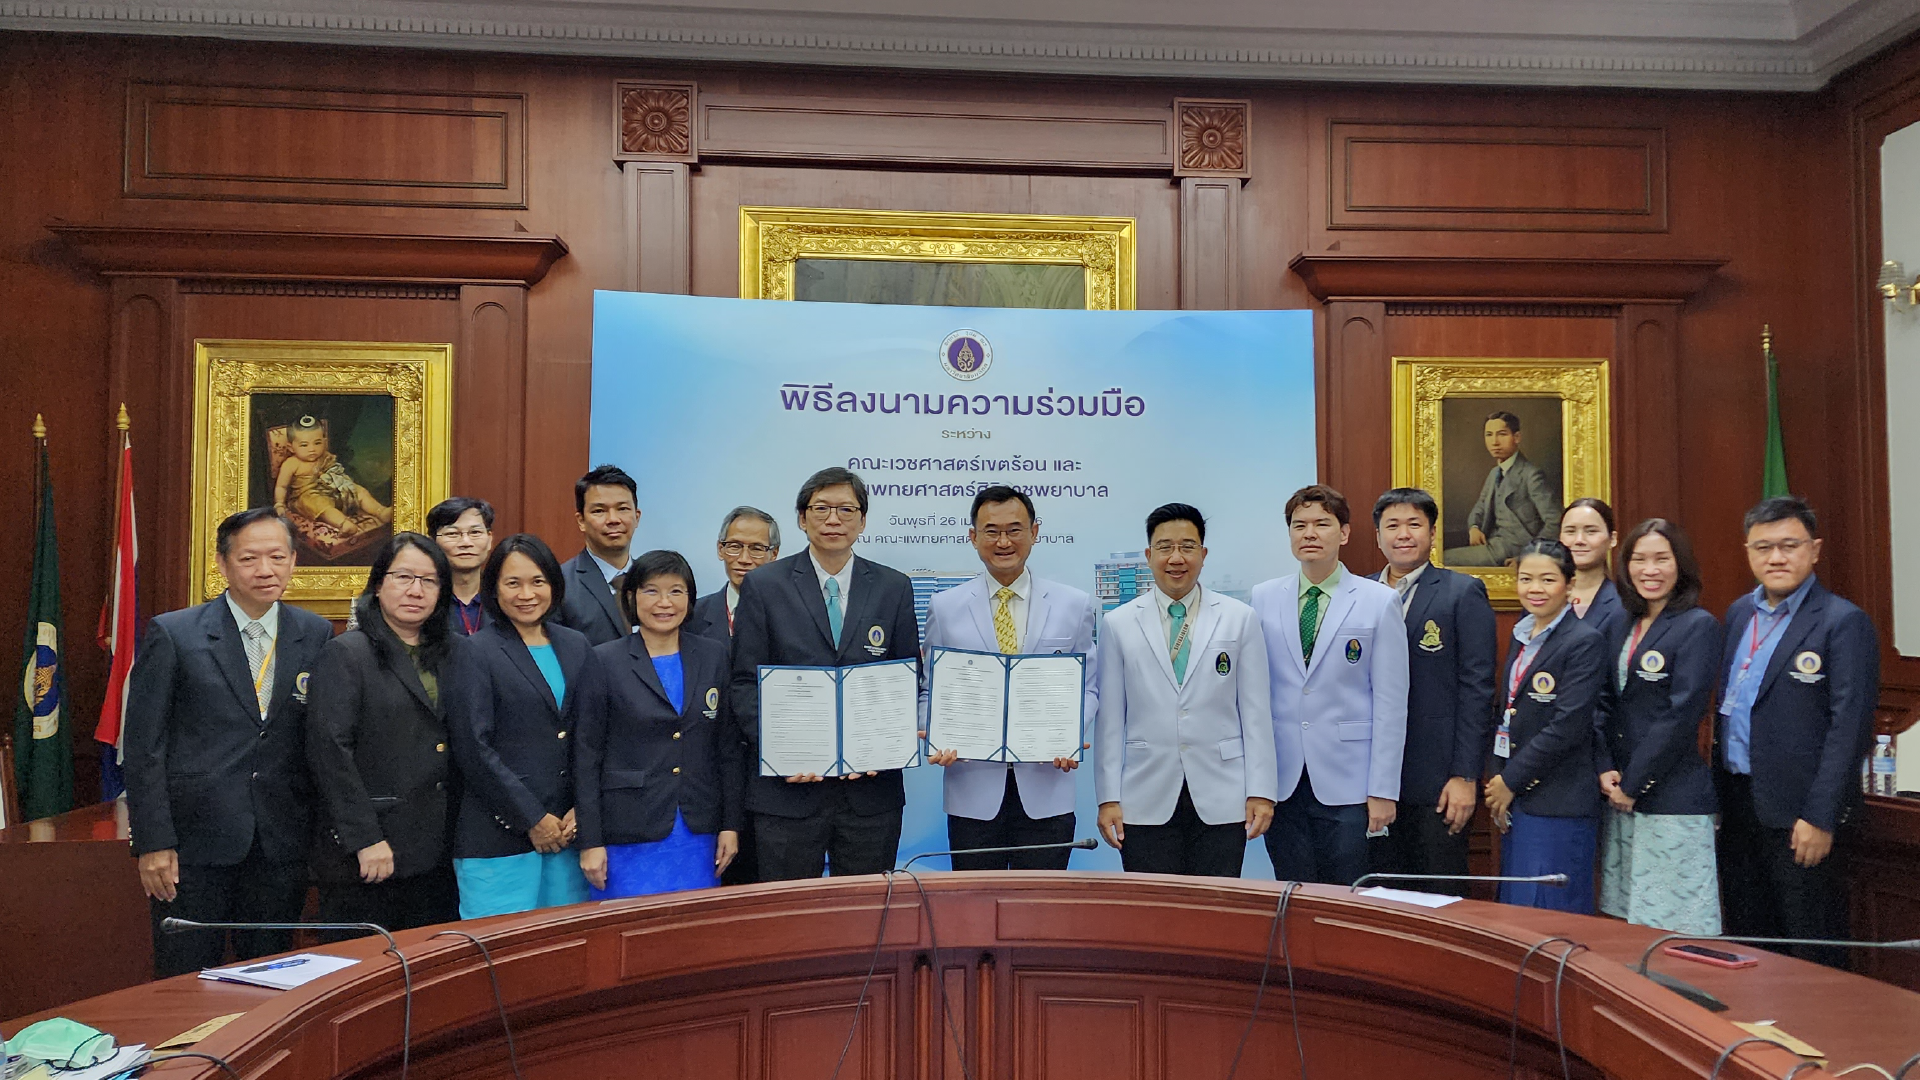 The MOU Signing Ceremony Between Siriraj and the Faculty of Tropical Medicine